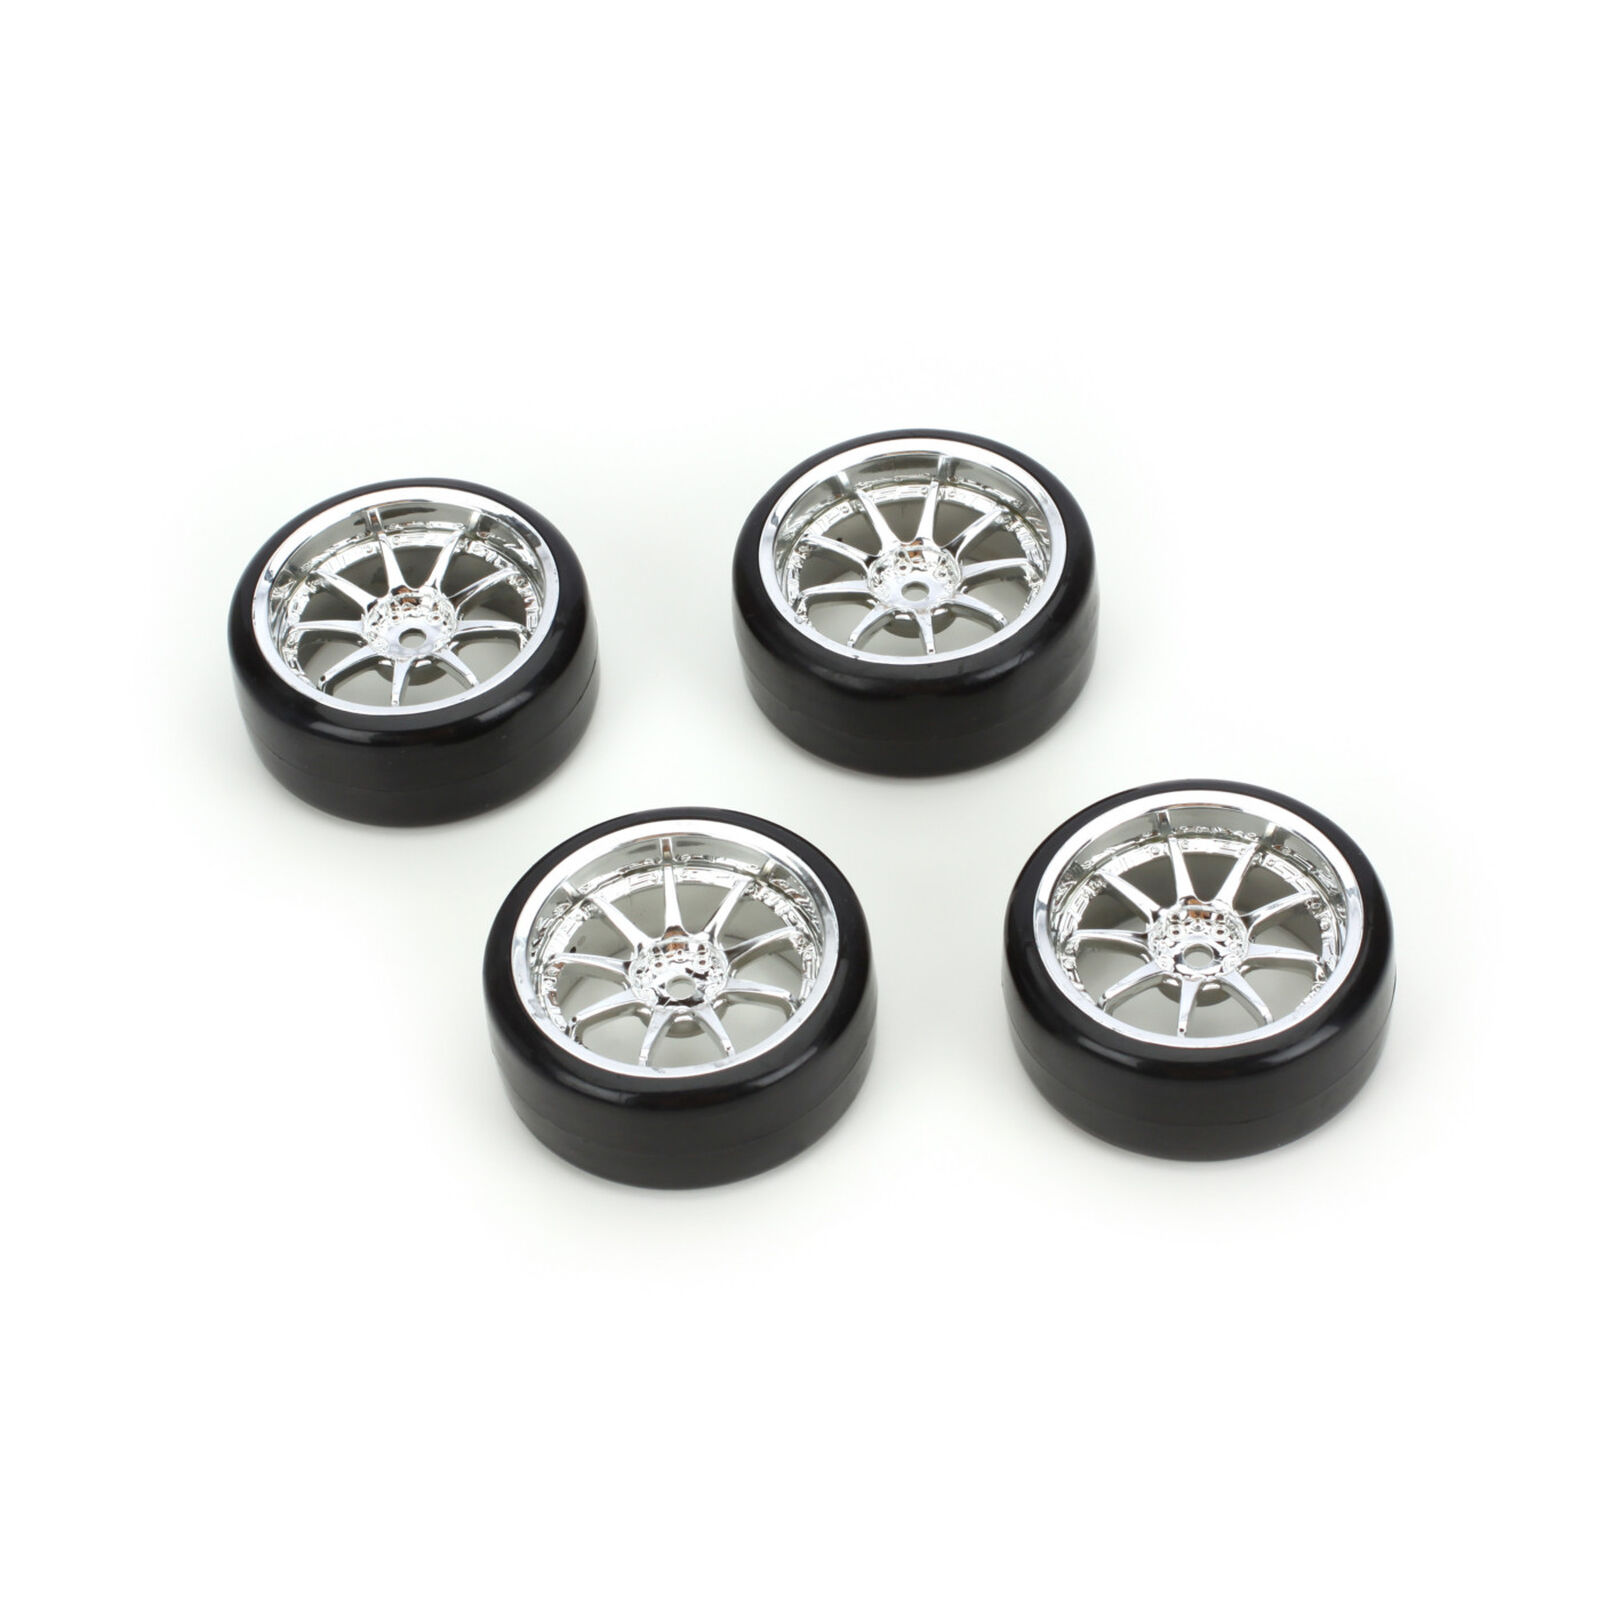 Type5 Complete Wheel and Tire Set (4): Drift Car